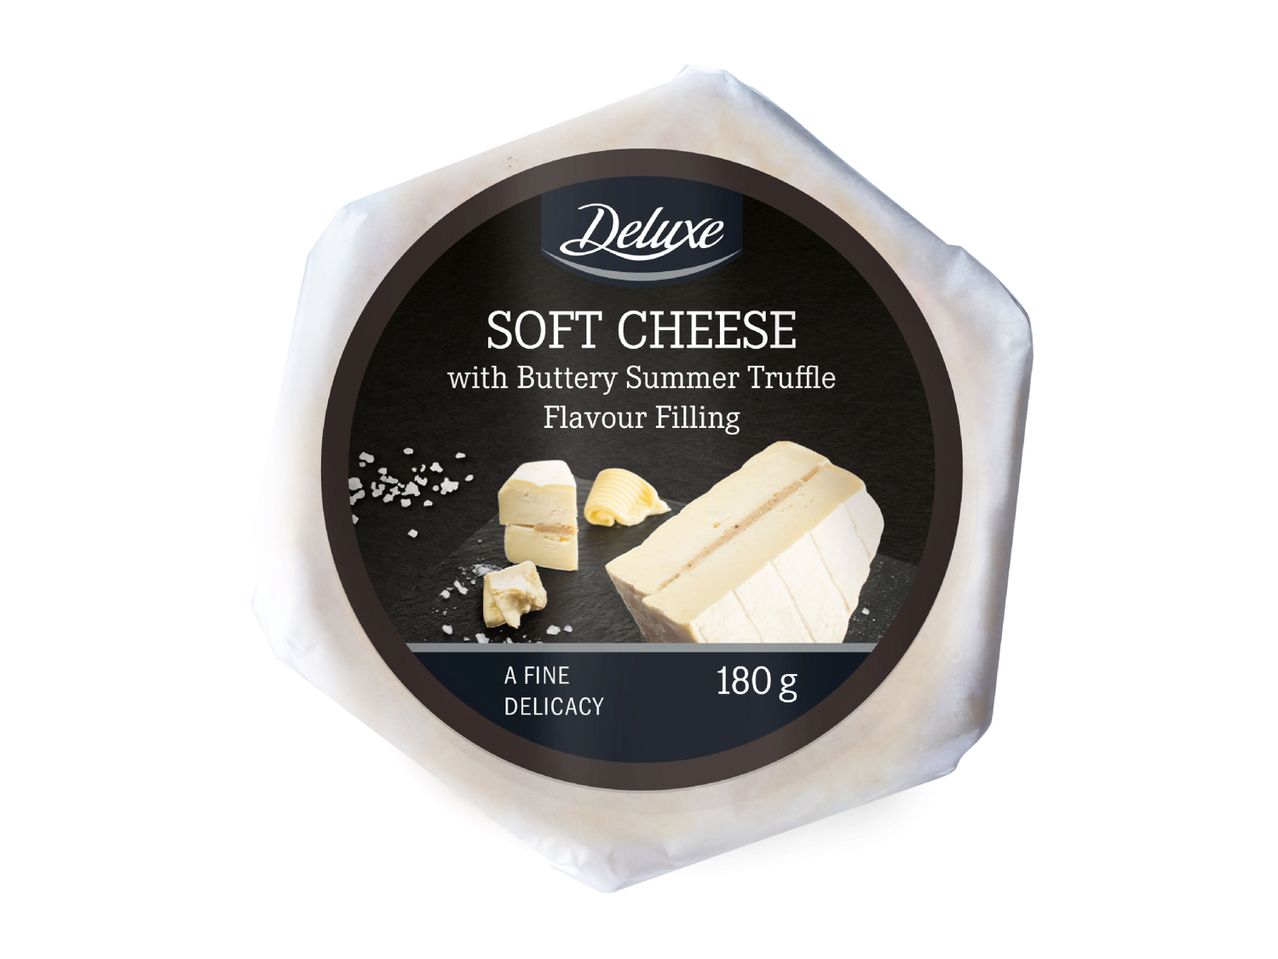 Go to full screen view: Deluxe Gourmet Soft Cheese with Filling - Image 2